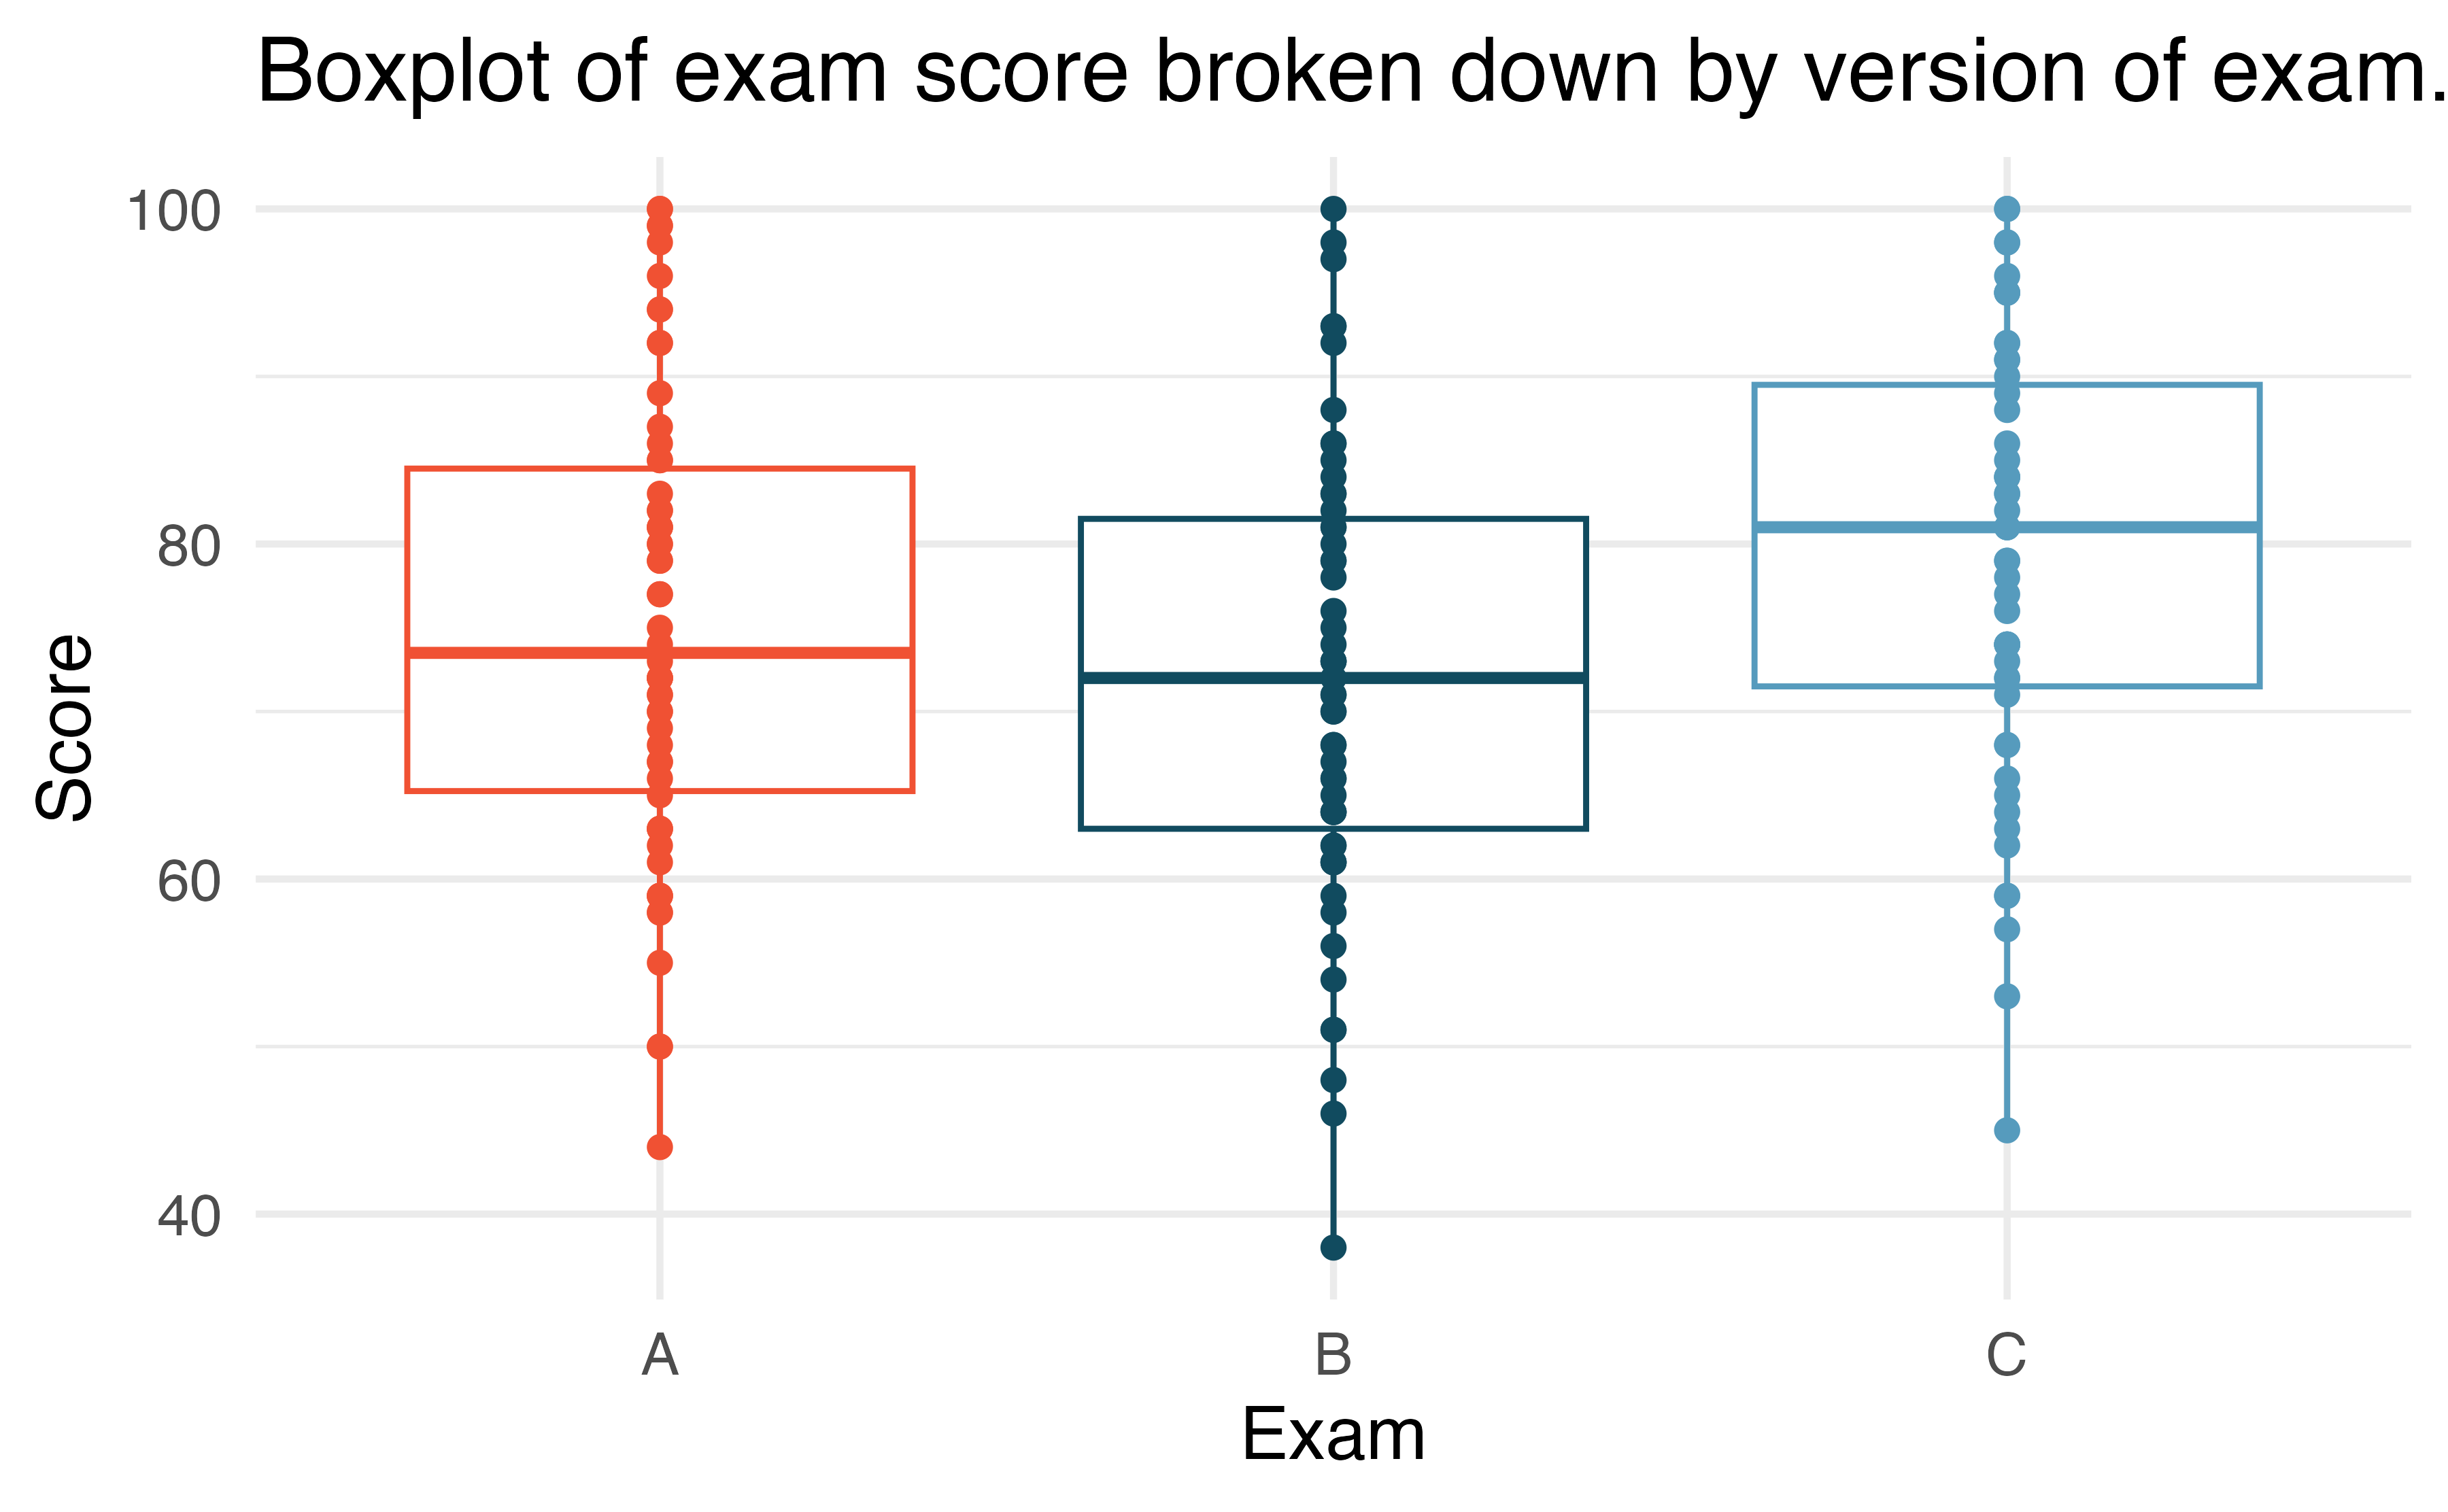 Exam scores for students given one of three different exams.